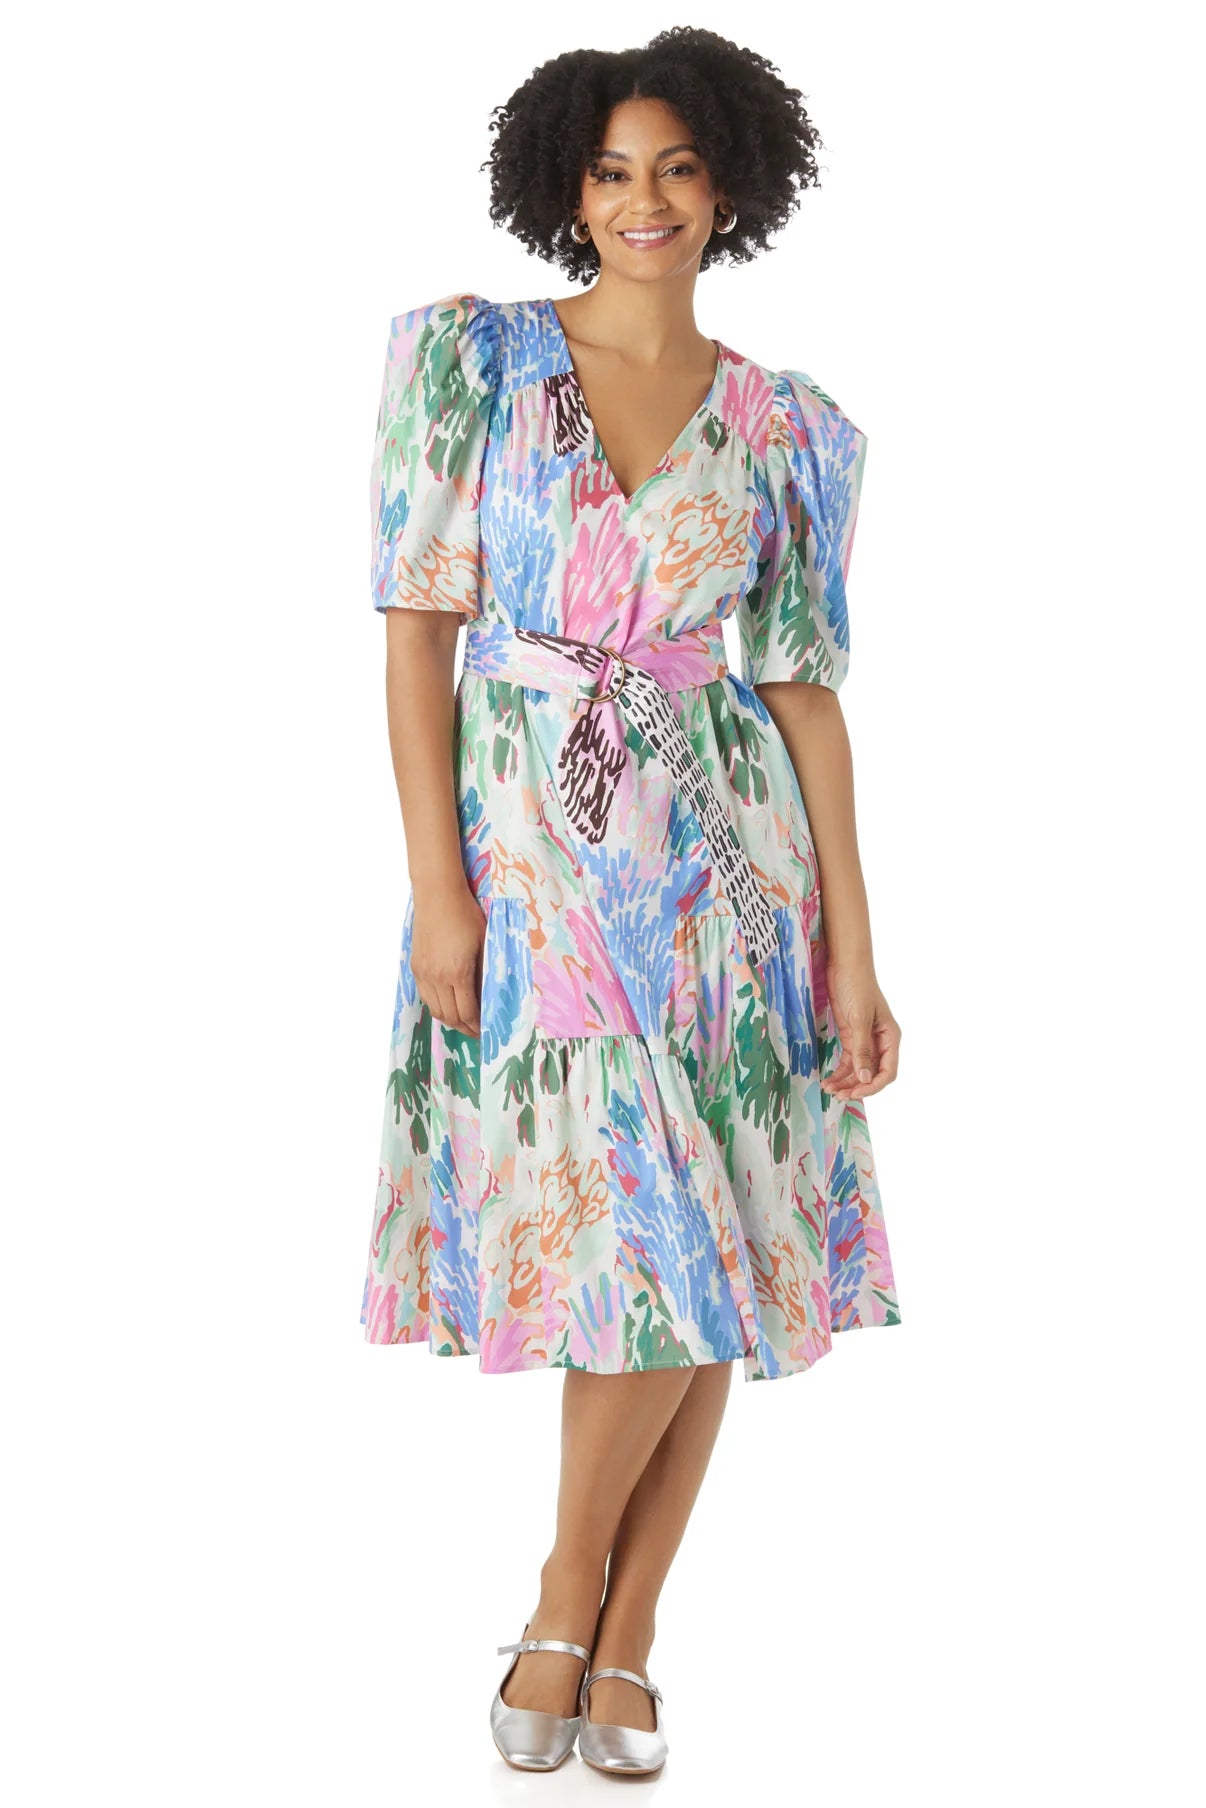 Crosby Odell Dress Painted Garden